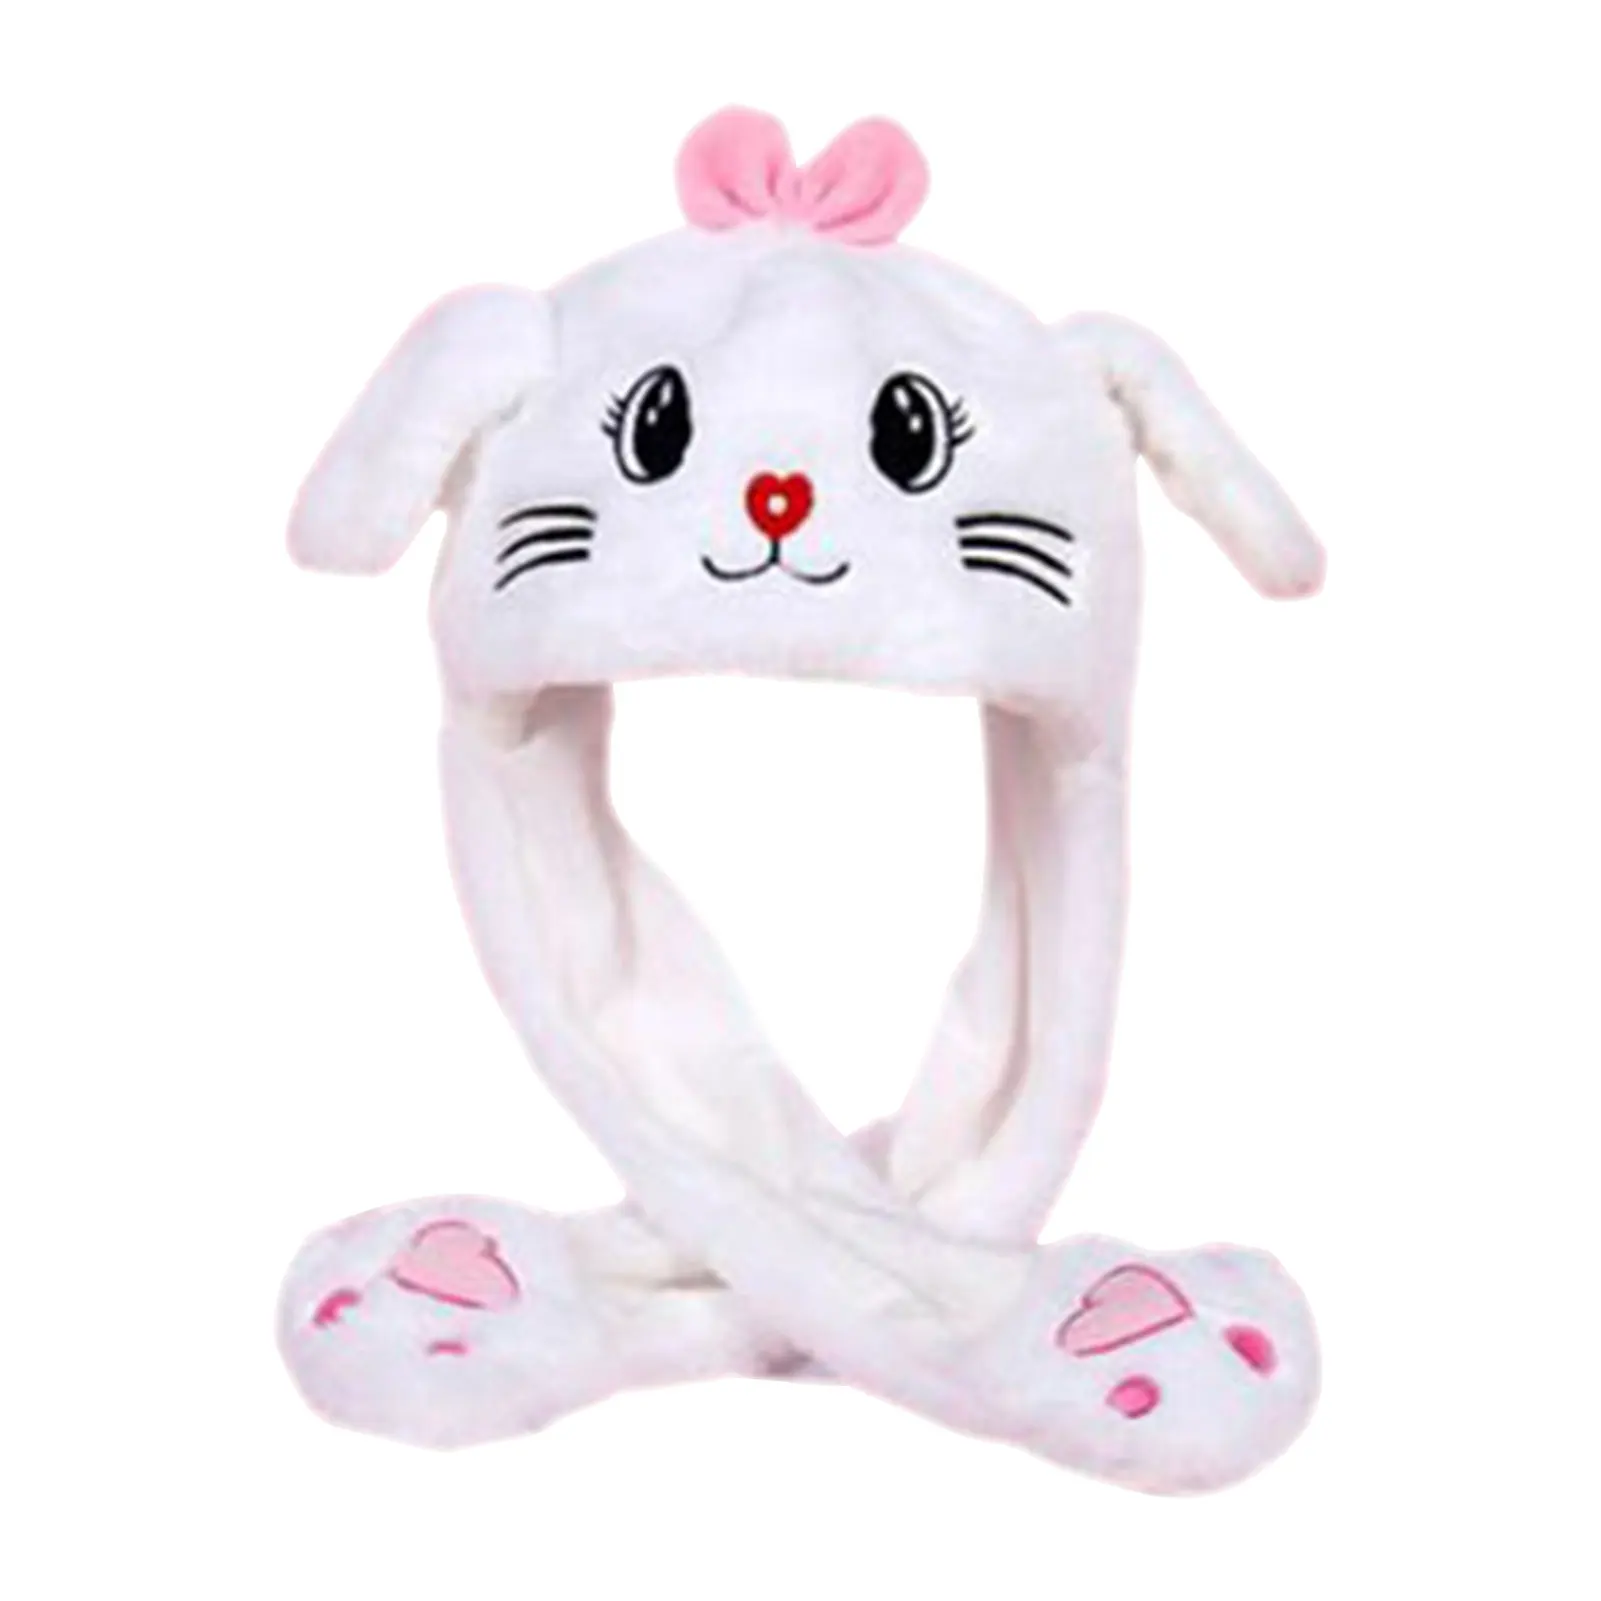 Lovely Moving Bunny Ears Hat Plush Rabbit Hat Funny Play Toy Up Down Moving Bunny Ears Toy Hat Girlfriend Children Girls Gifts 3 in1 gloves scarf rabbit hat long ears cute cartoon hat kawaii funny birthday gift bunny plush cap winter pink